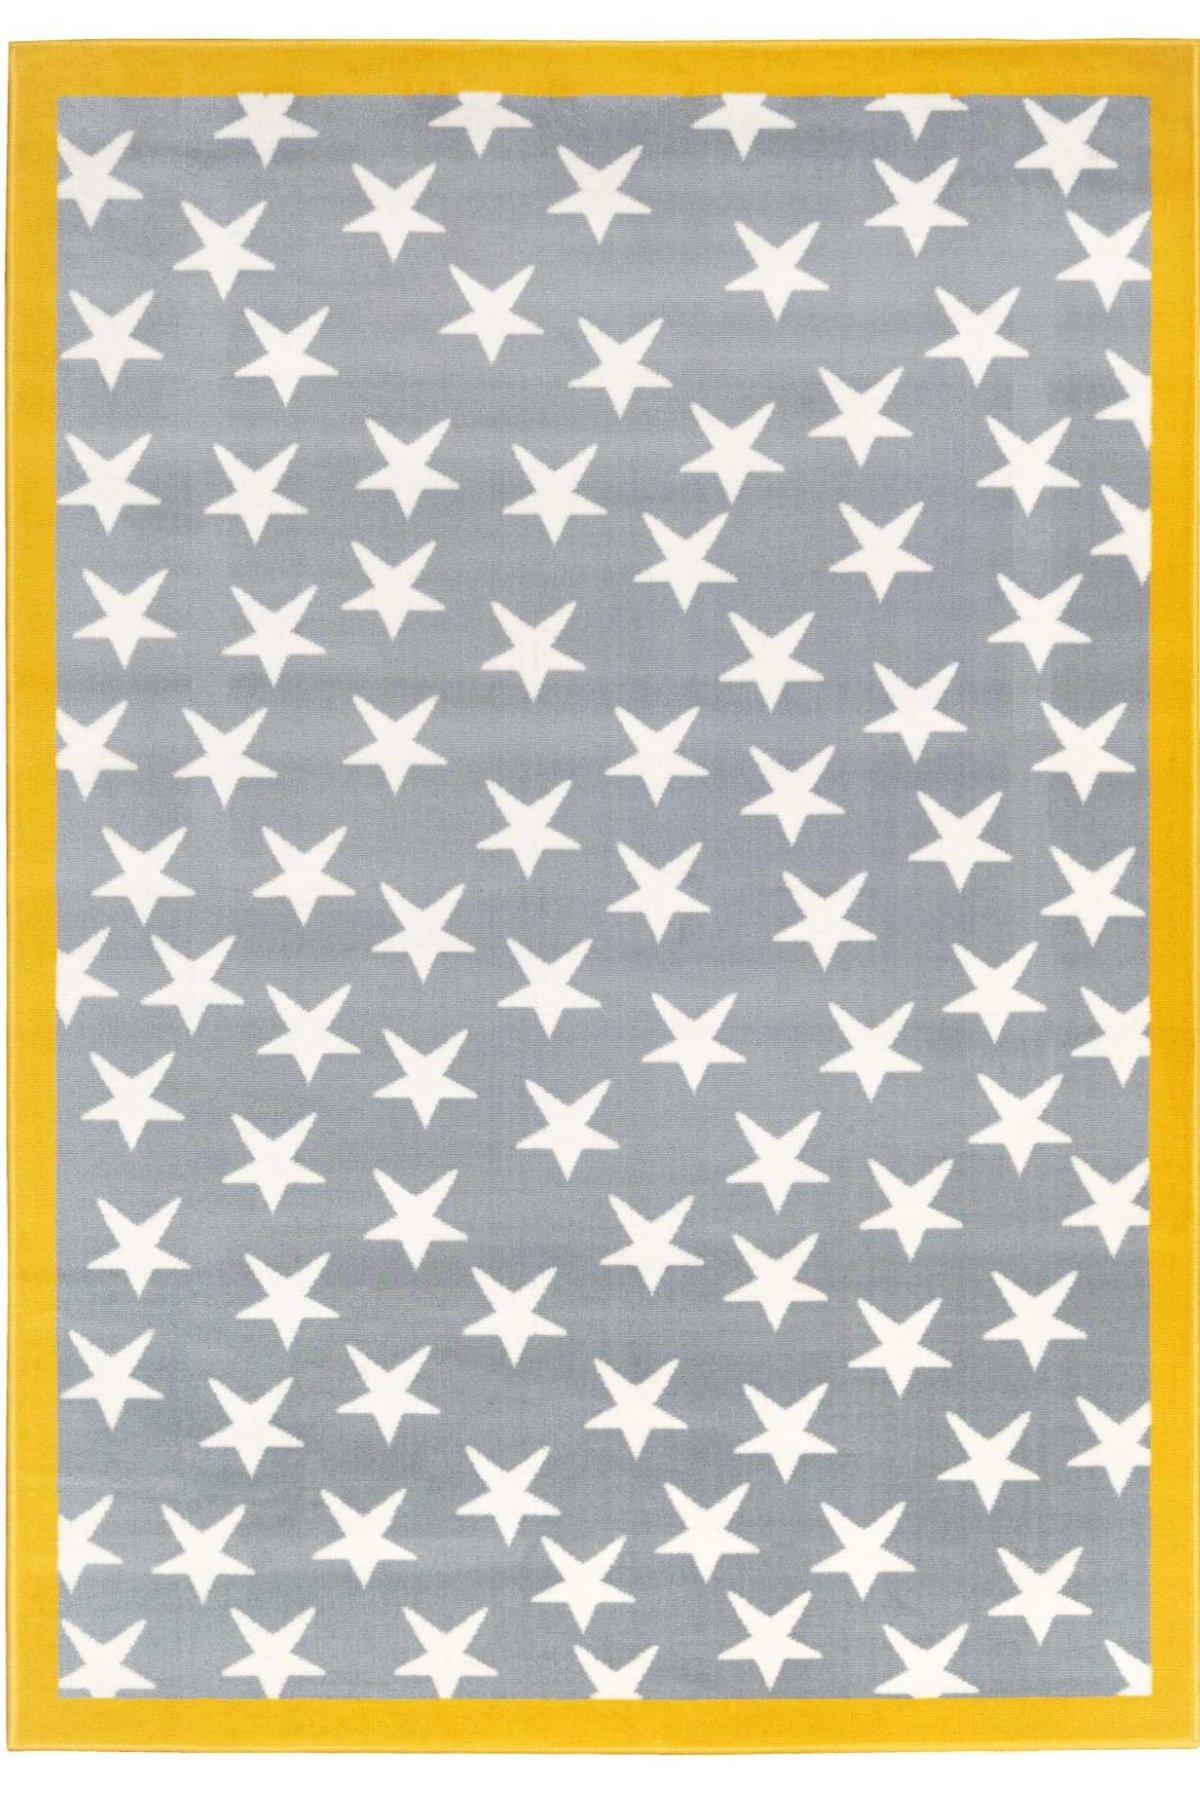 Grey and White Star Pattern Living Area Rug